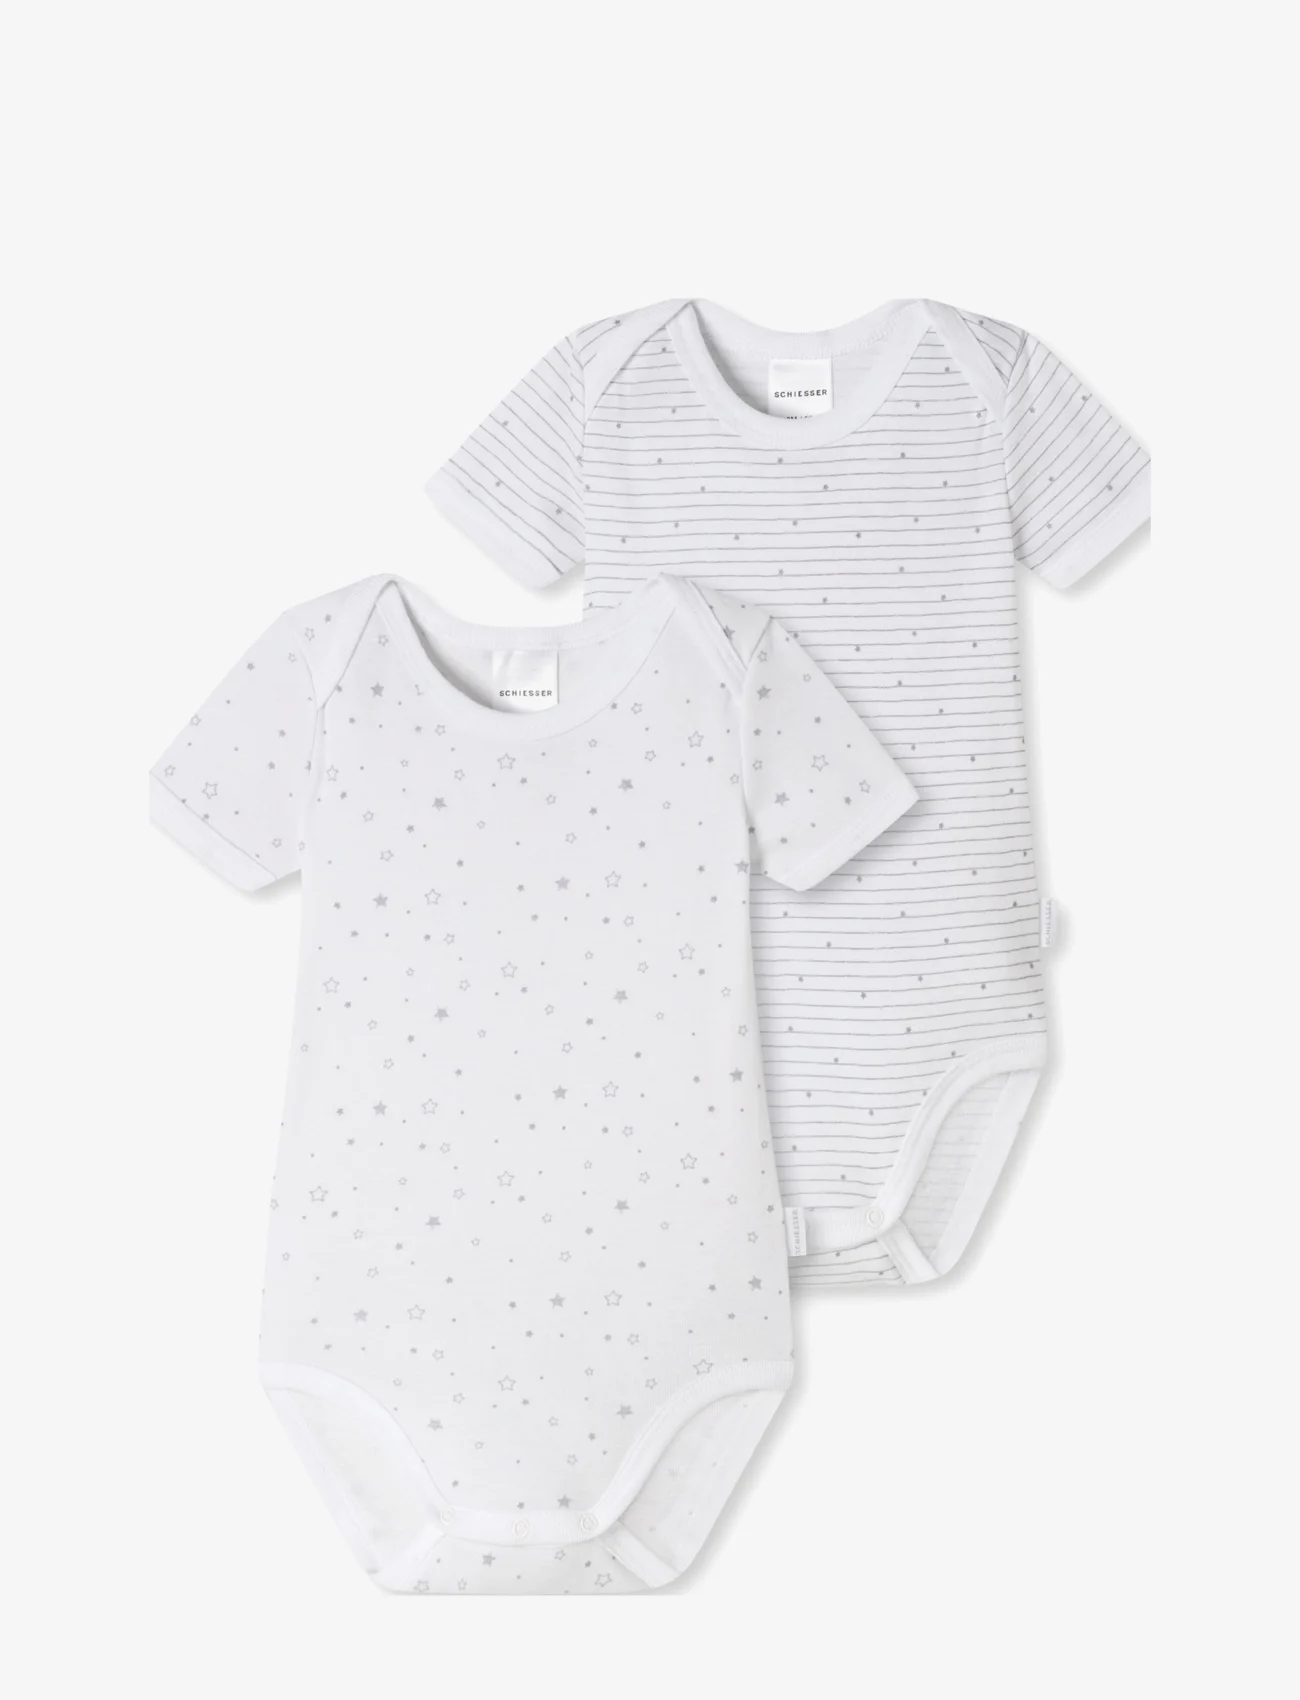 Schiesser - Baby Body 1/2 - lowest prices - assorted 1 - 0